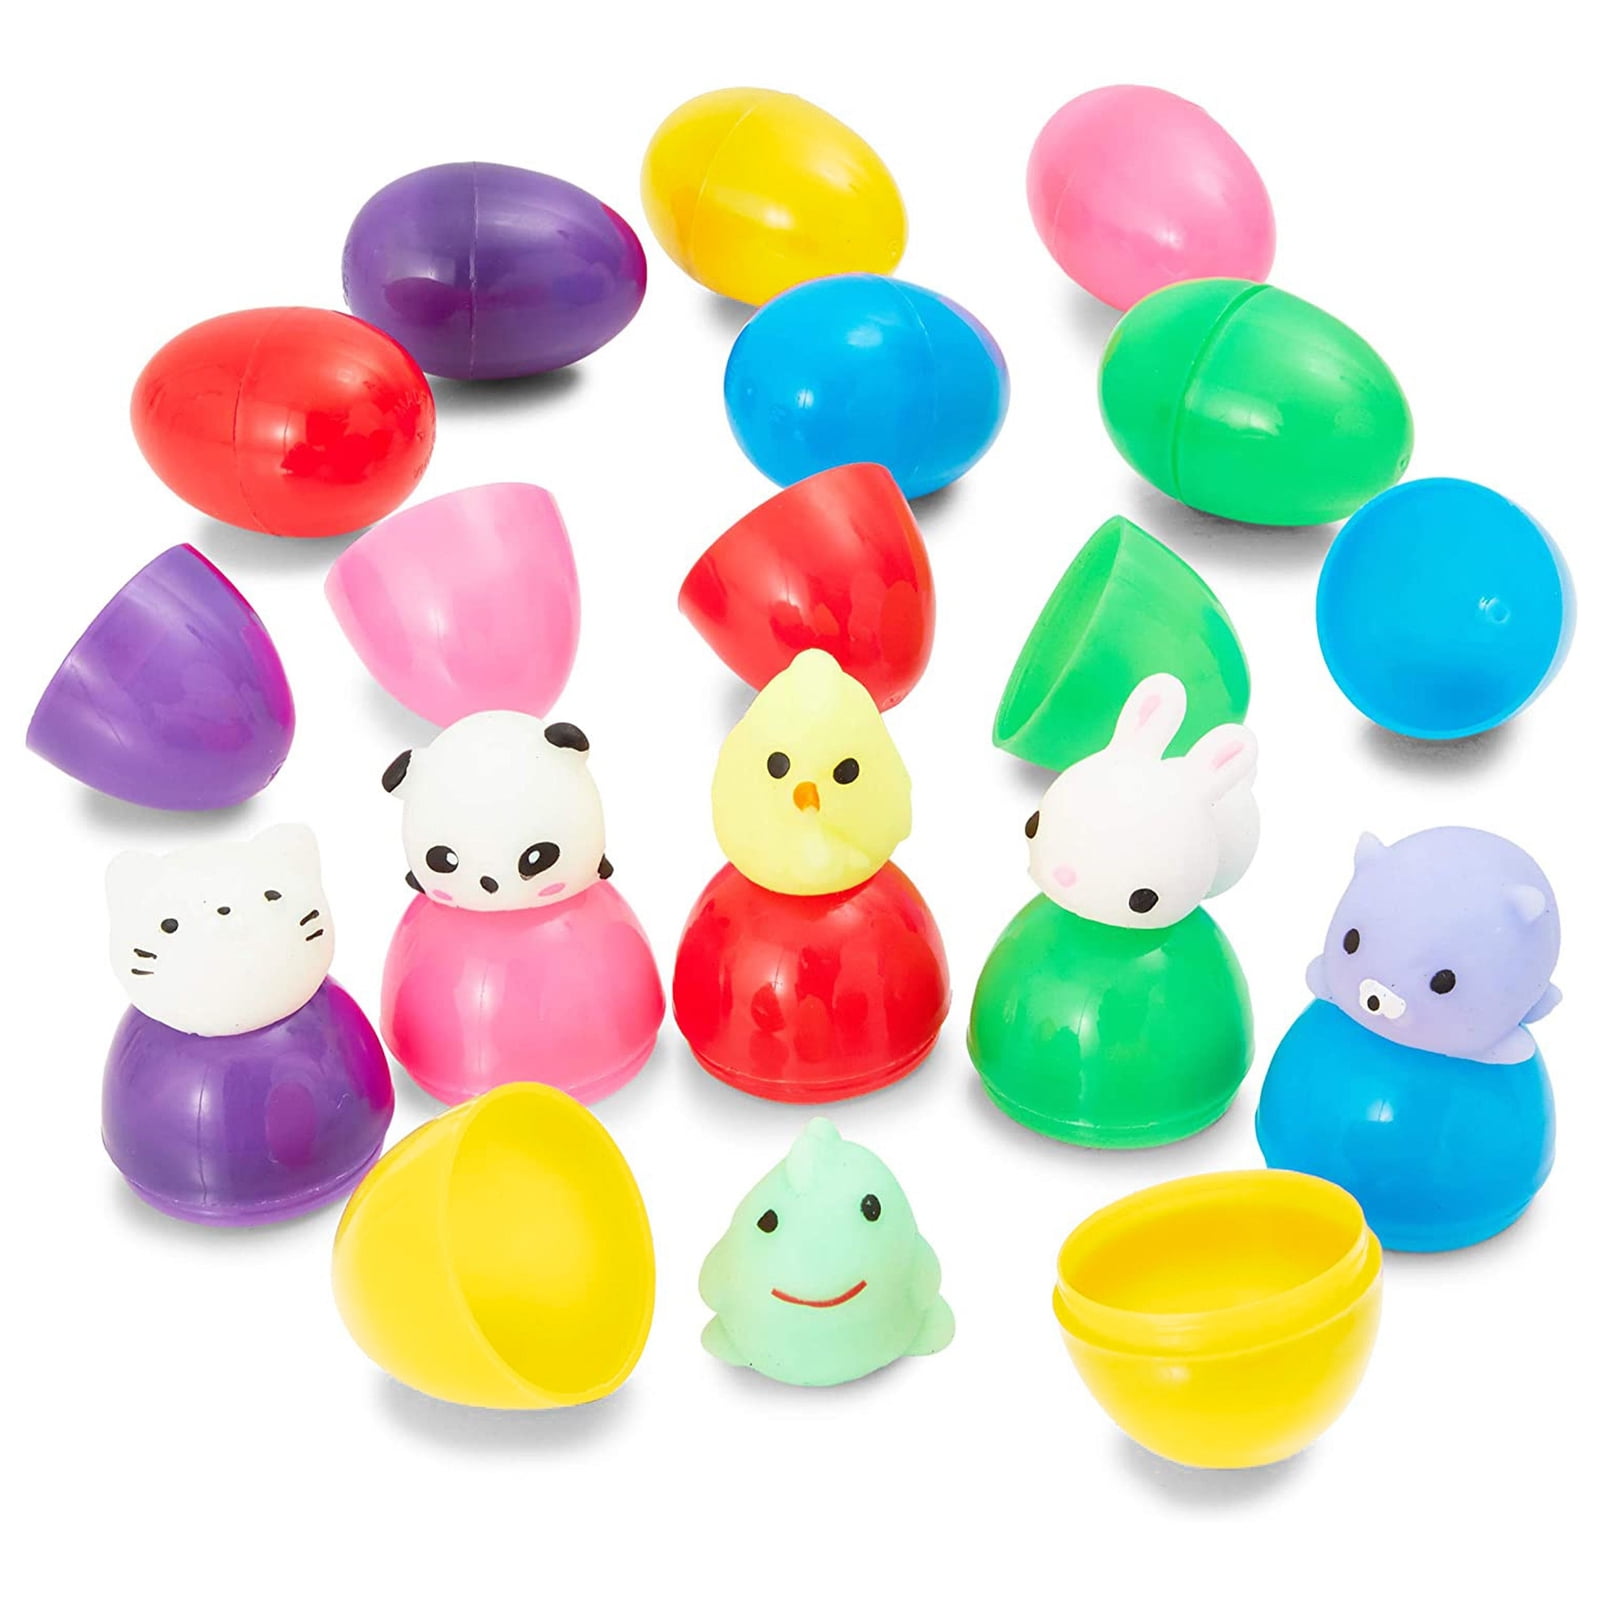 Easter Eggs Hunt and Basket Stuffers Fillers Prefilled Plastic Eggs with Small Toys Inside for Easter Party Favors YEAHBEER 48 Pack Toys Filled Easter Eggs 48 Pack 